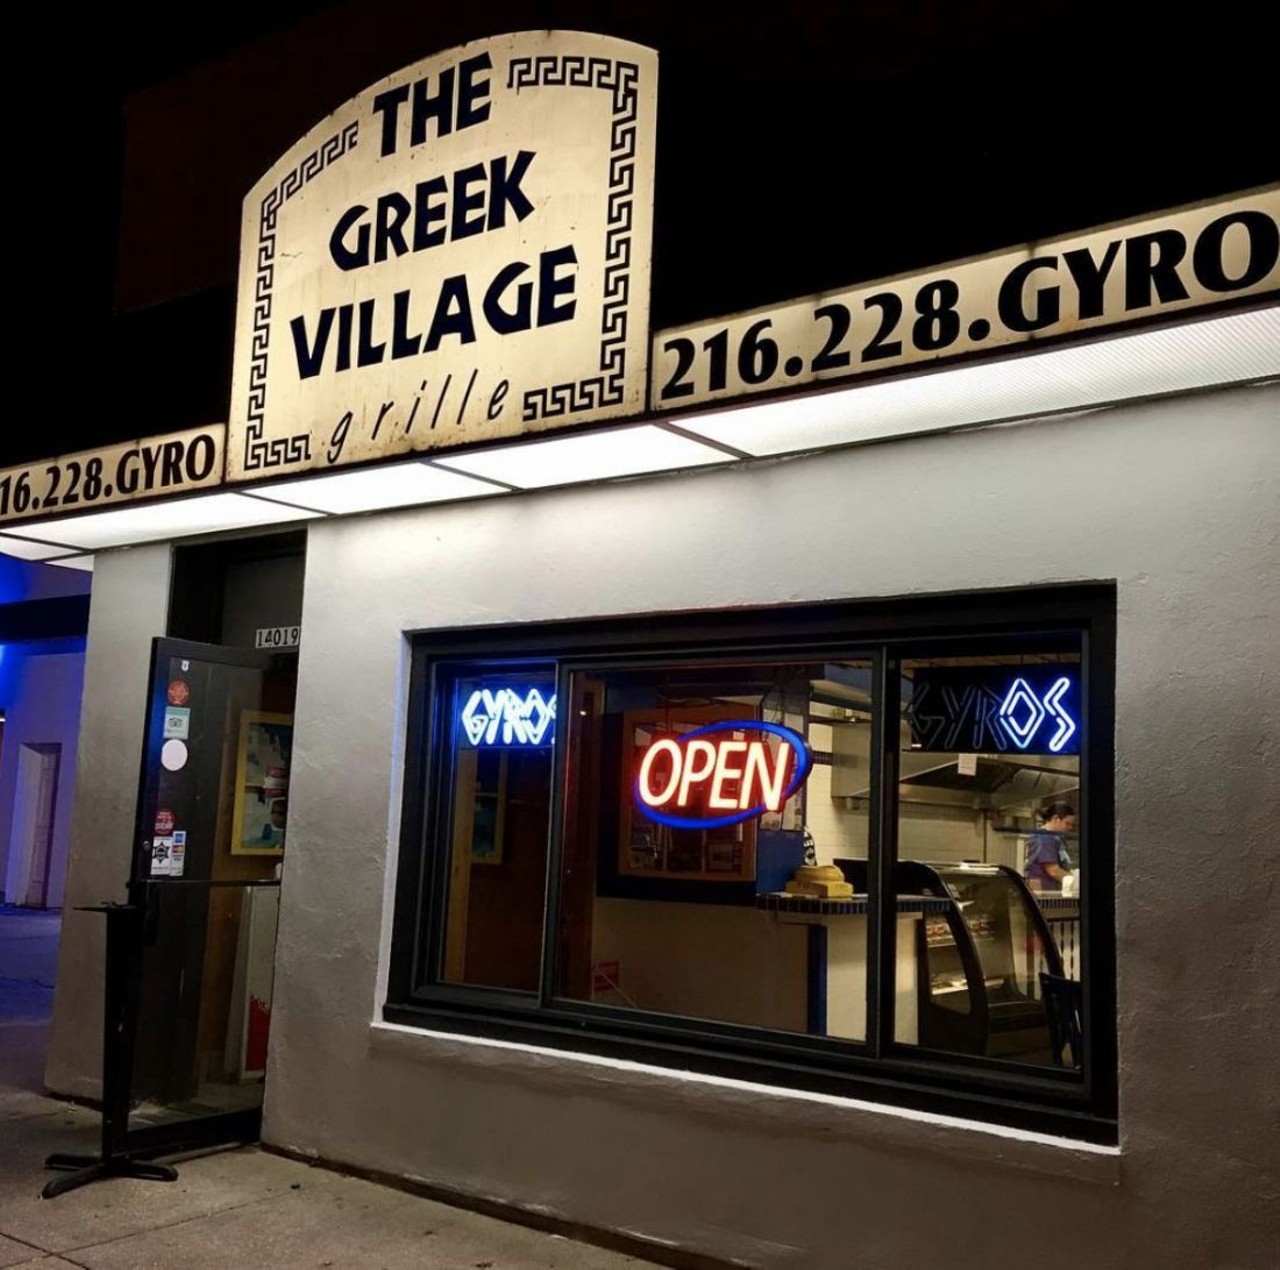  Greek Village Grille
14019 Madison Ave., Lakewood 
For crying out loud, it&#146;s pronounced YEE-roh! Regardless, the Greek creation at this location has all the components of a typical sandwich: bread, meat, veggies and sauce. 
Photo via @LkwdCitizen/Instagram